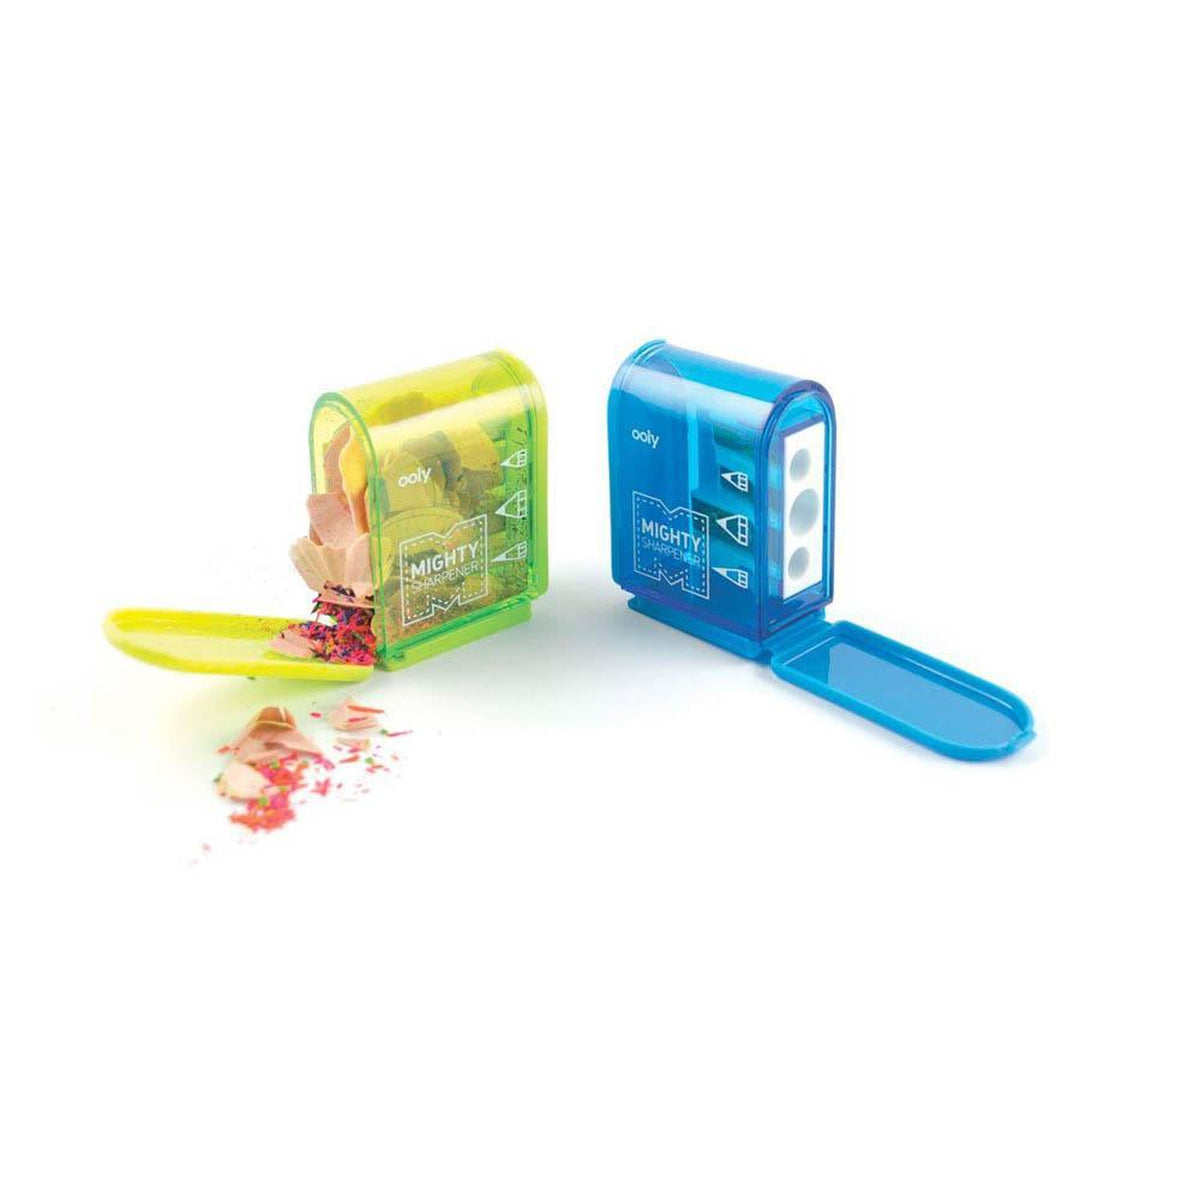 Ooly mighty pencil sharpener - assorted-arts & crafts-Ooly-Dilly Dally Kids